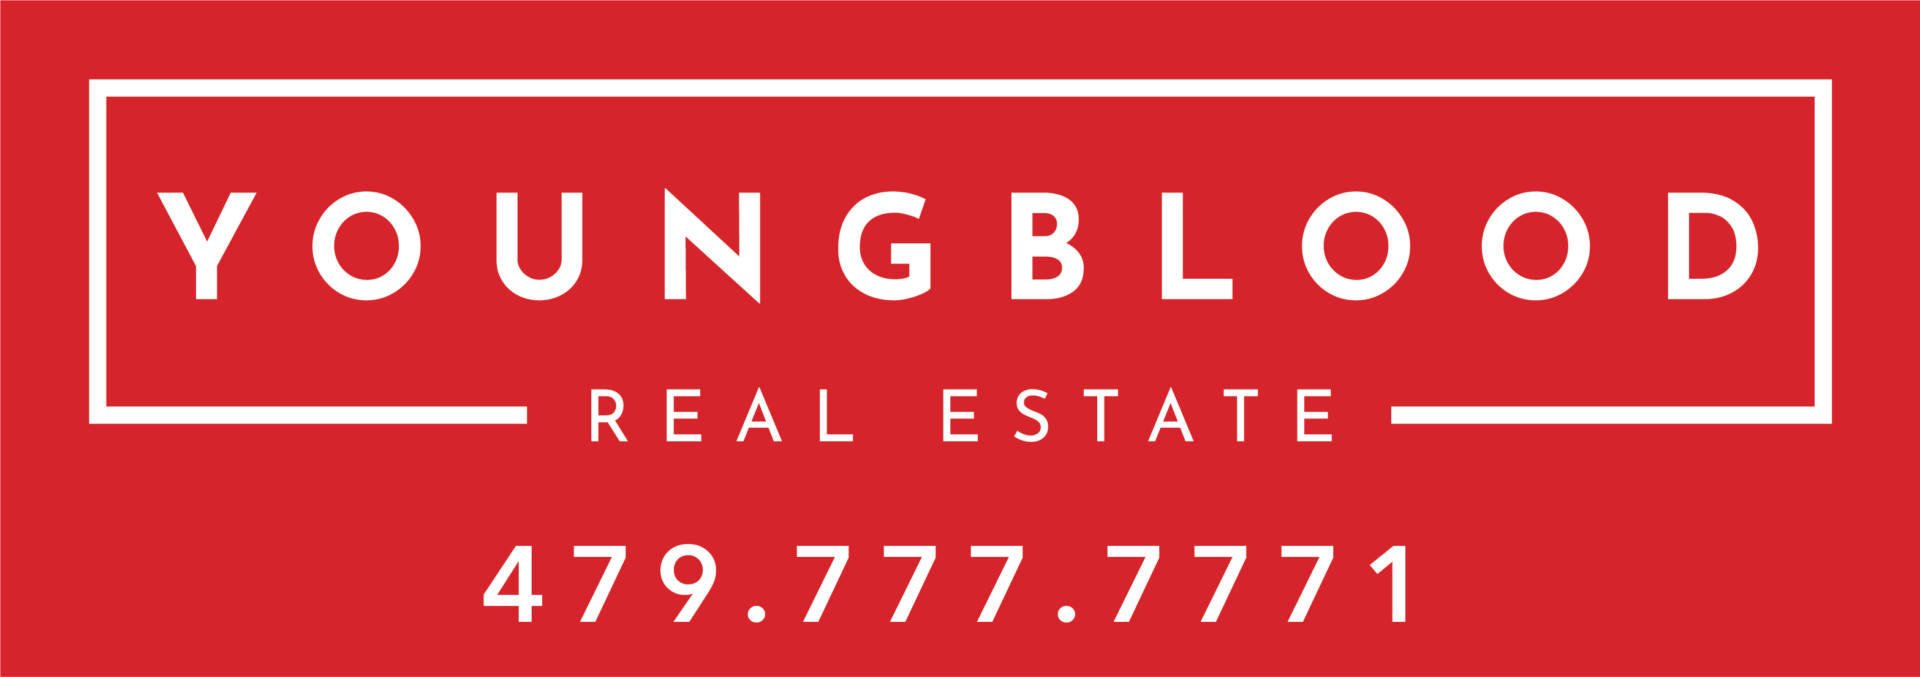 Youngblood Real Estate logo